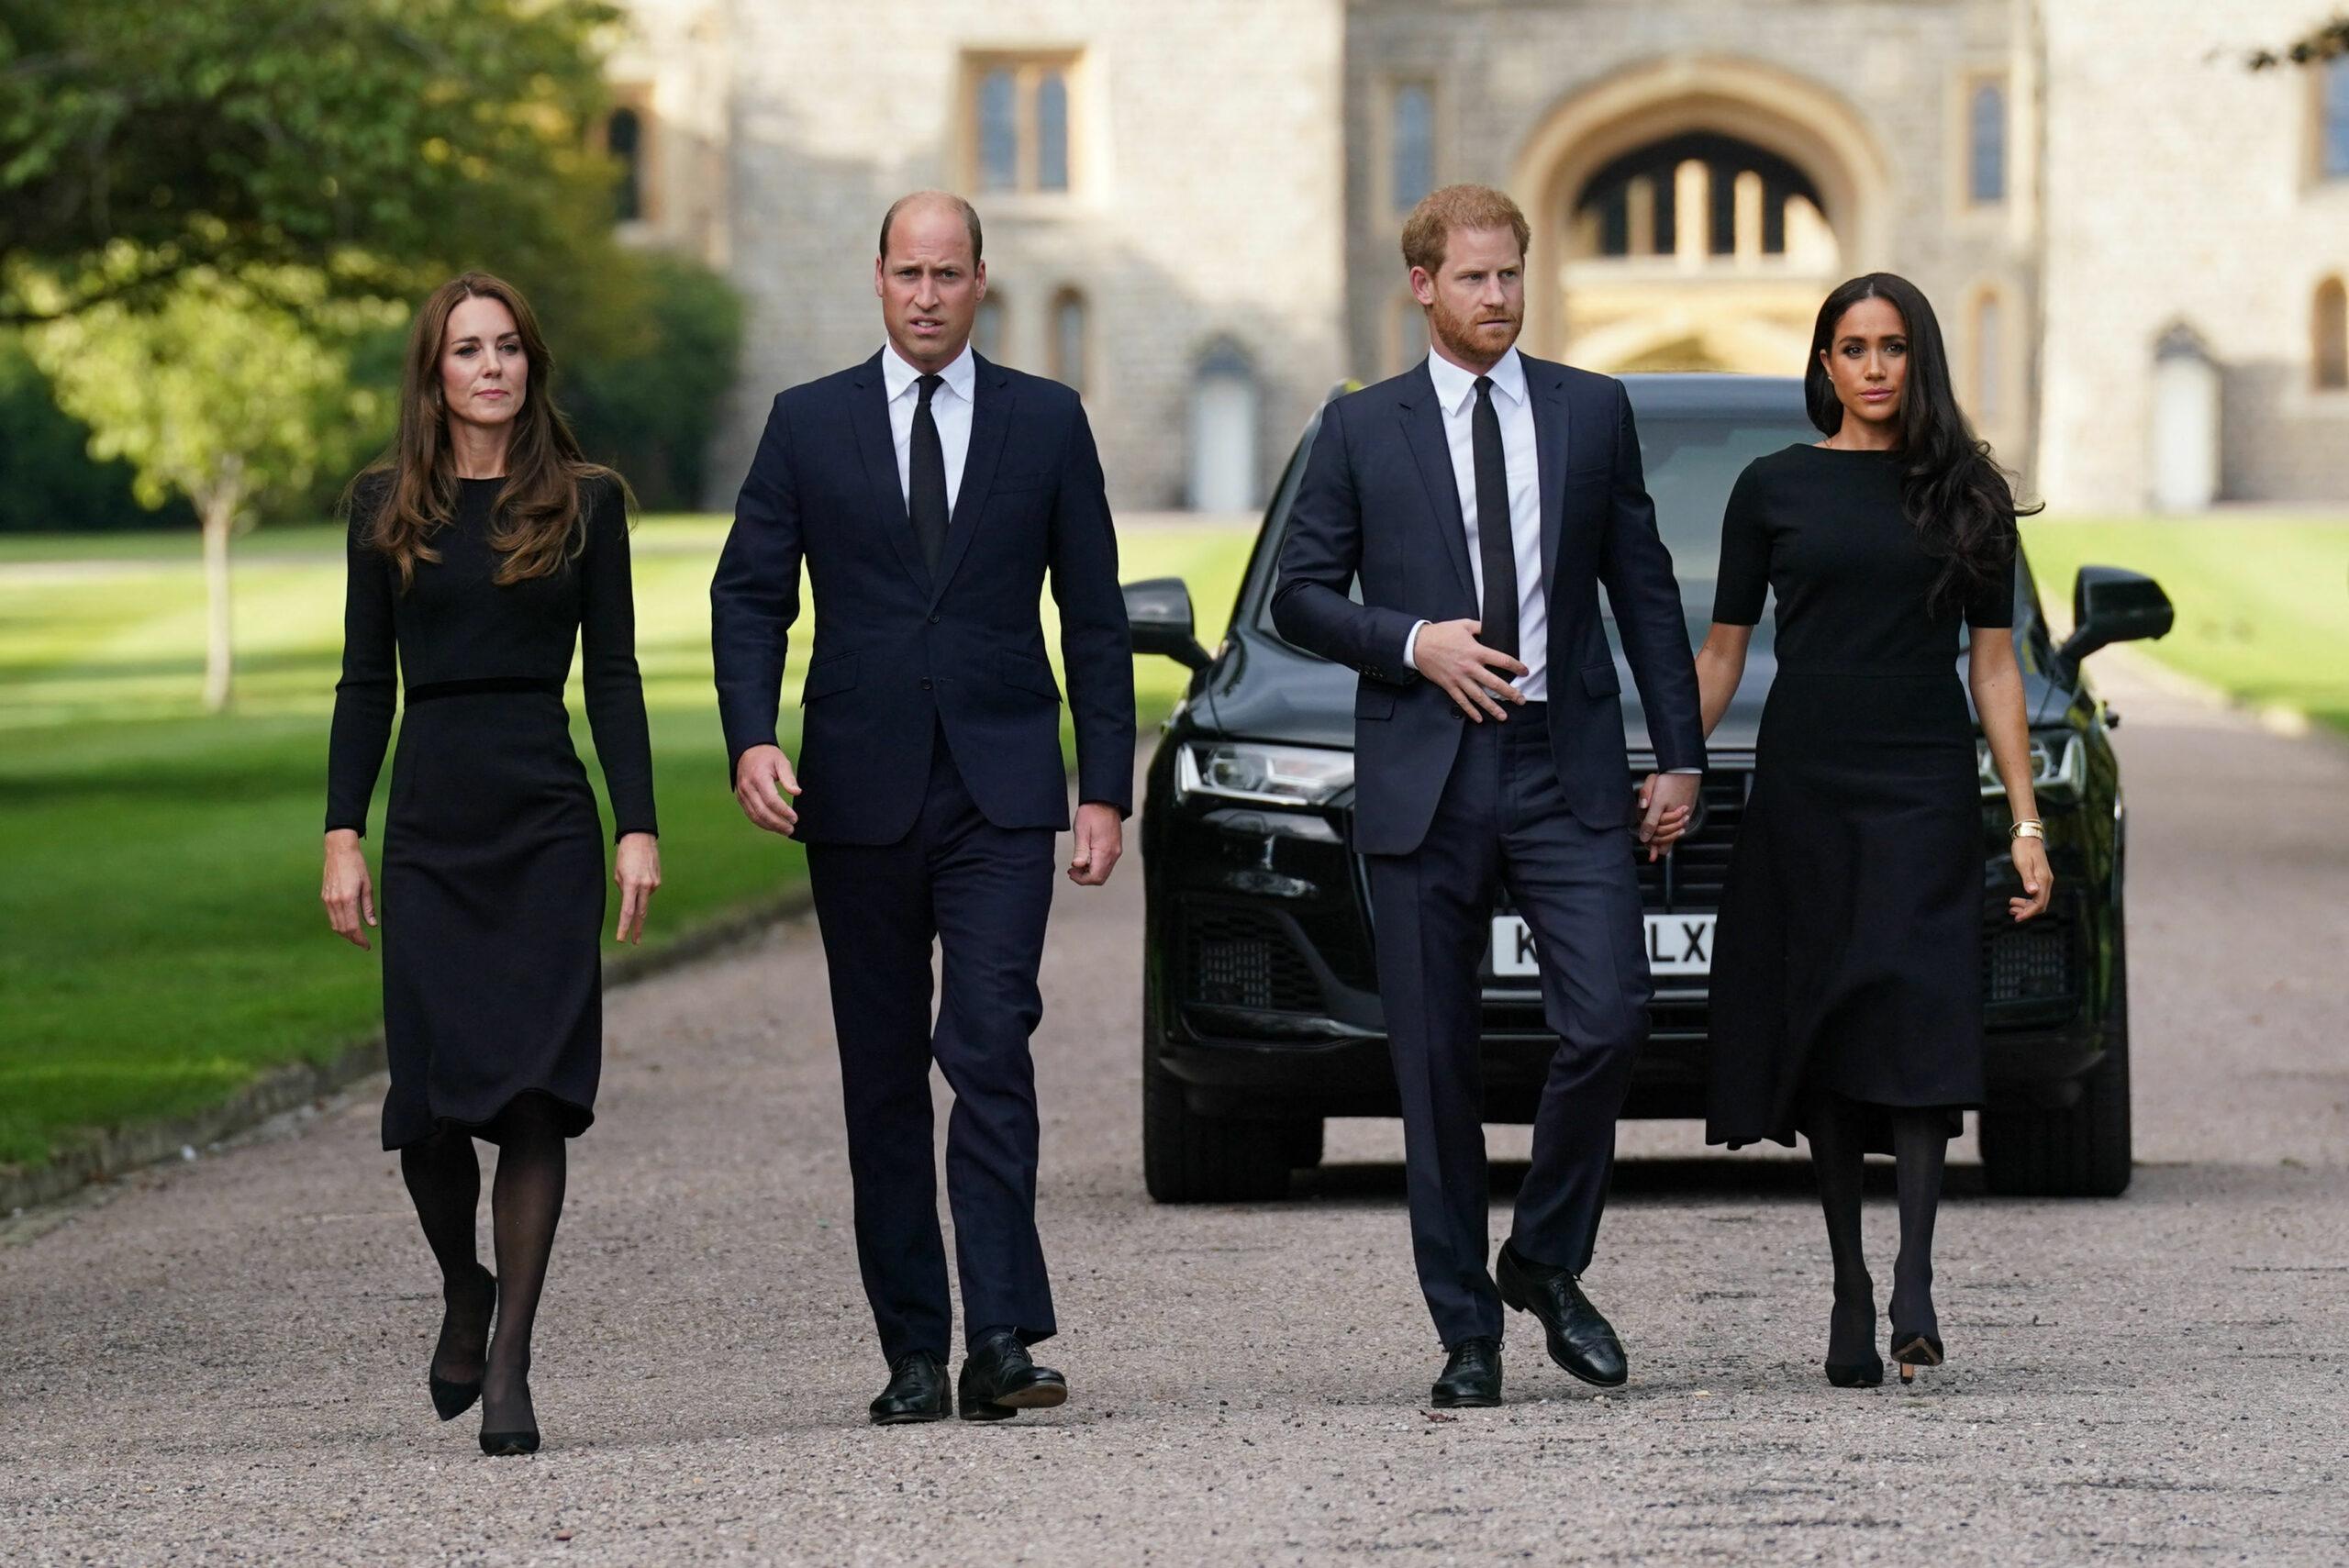 Kate Middleton, Prince William, Prince Harry, and Meghan Markle after the death of Queen Elizabeth II